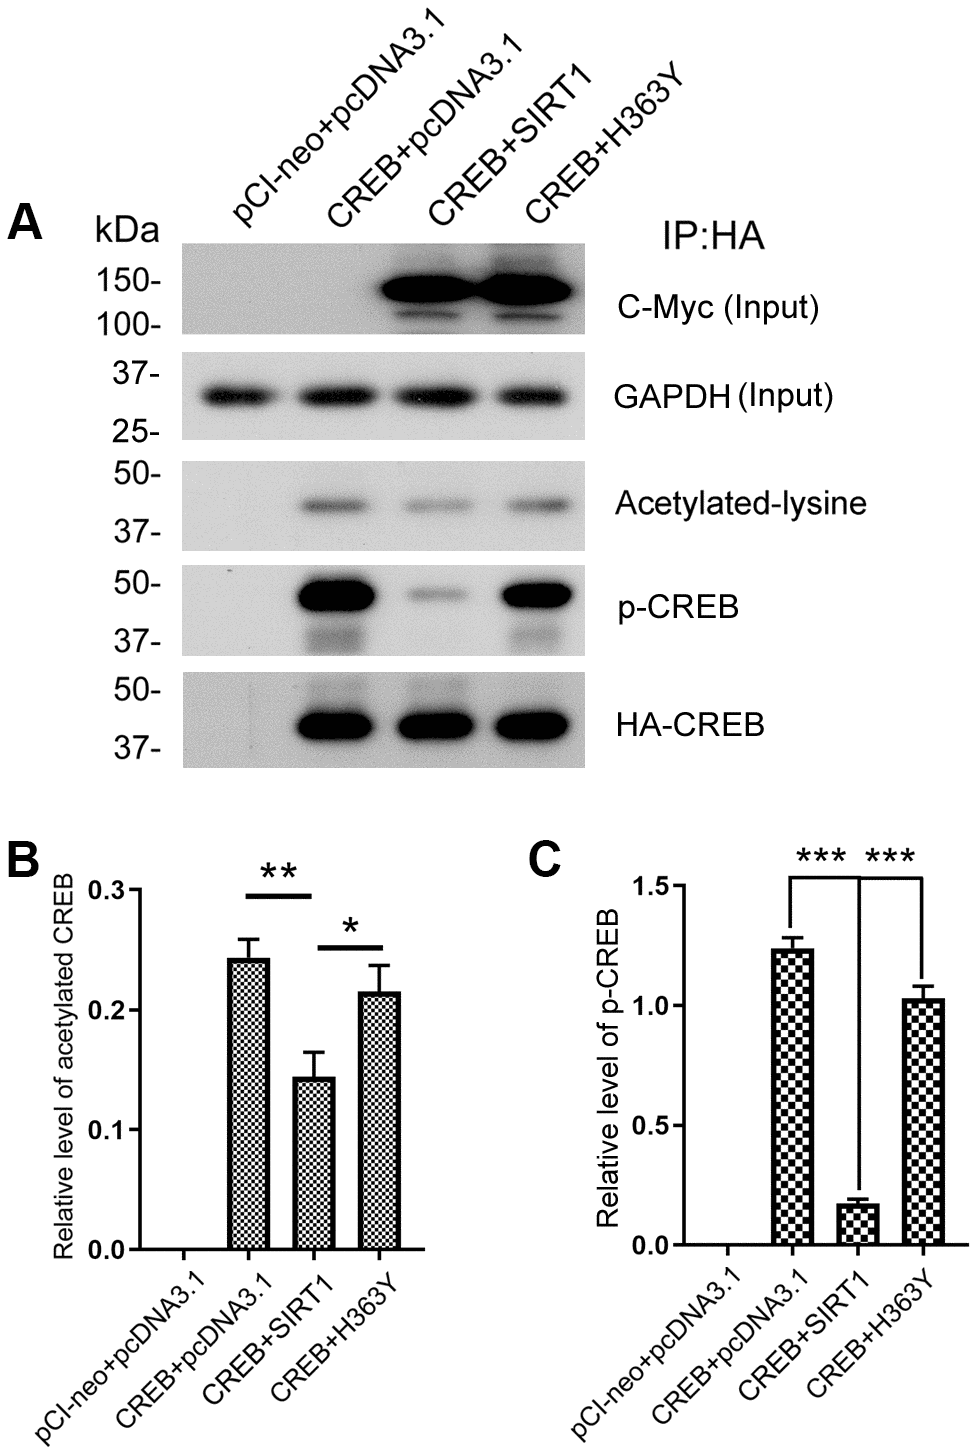 SIRT1 deacetylates CREB and inhibits phosphorylation of CREB at Ser133. (A) pCI/HA-CREB was co-transfected with pcDNA3.1/SIRT1 or pcDNA3.1/H363Y into HEK-293A cells. CREB was immunoprecipitated with anti-HA and analyzed by western blots developed with anti-CREB or anti-acetylated-lysine or anti-pS133-CREB antibody. The relative levels of CREB acetylation (B) or phosphorylation at Ser133 (C) are normalized with CREB levels and are represented as mean ± S.D. (n = 3); *, p p p 